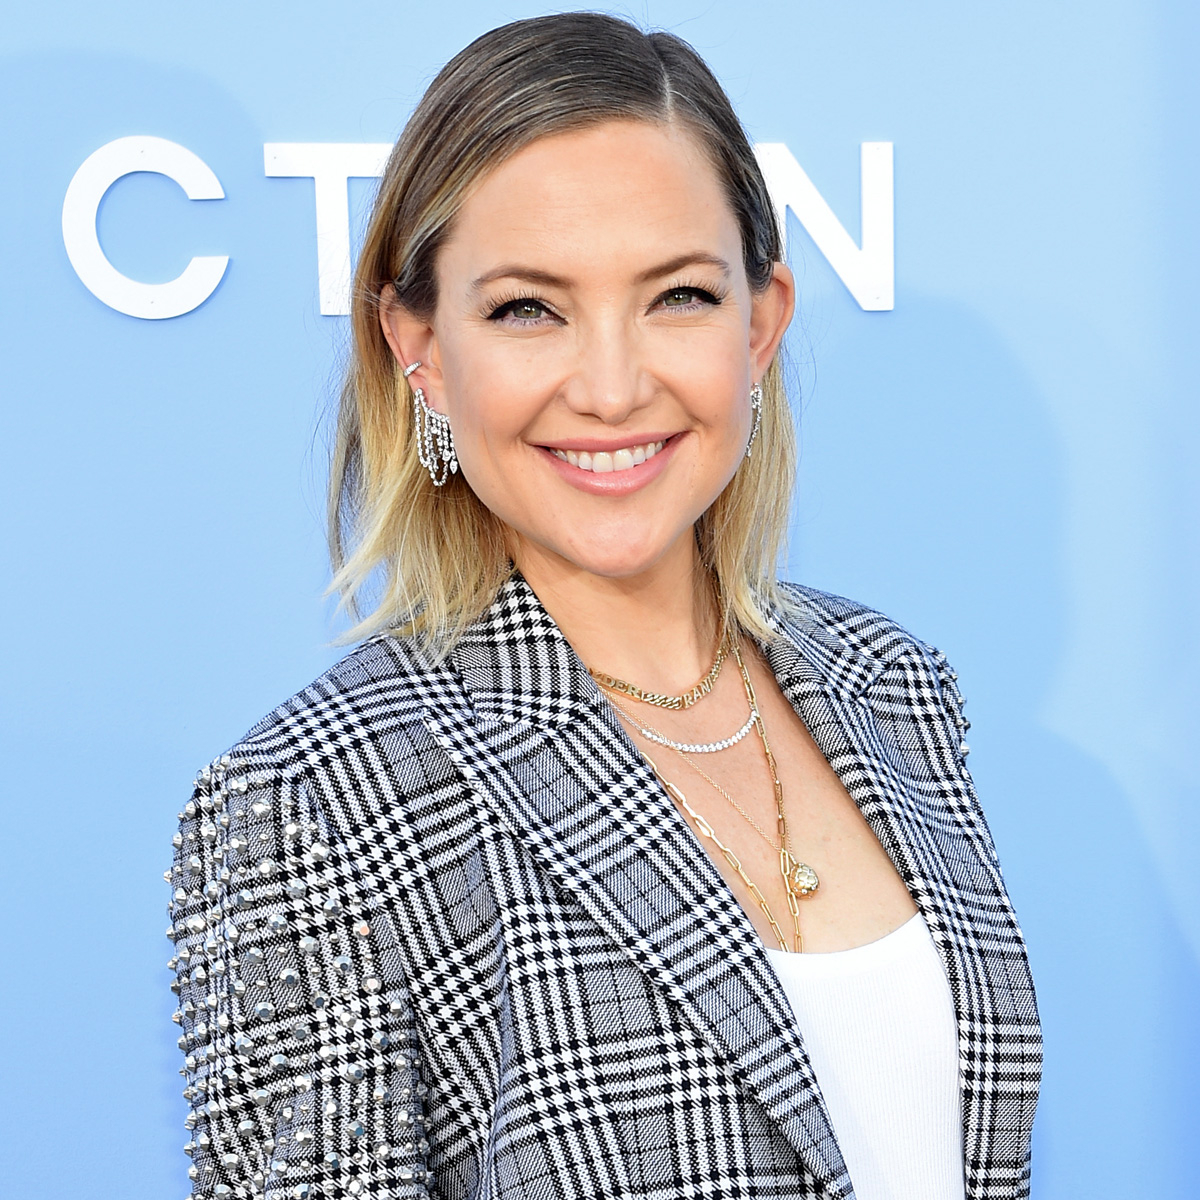 Kate Hudson says she hopes to “connect” with her estranged father’s children